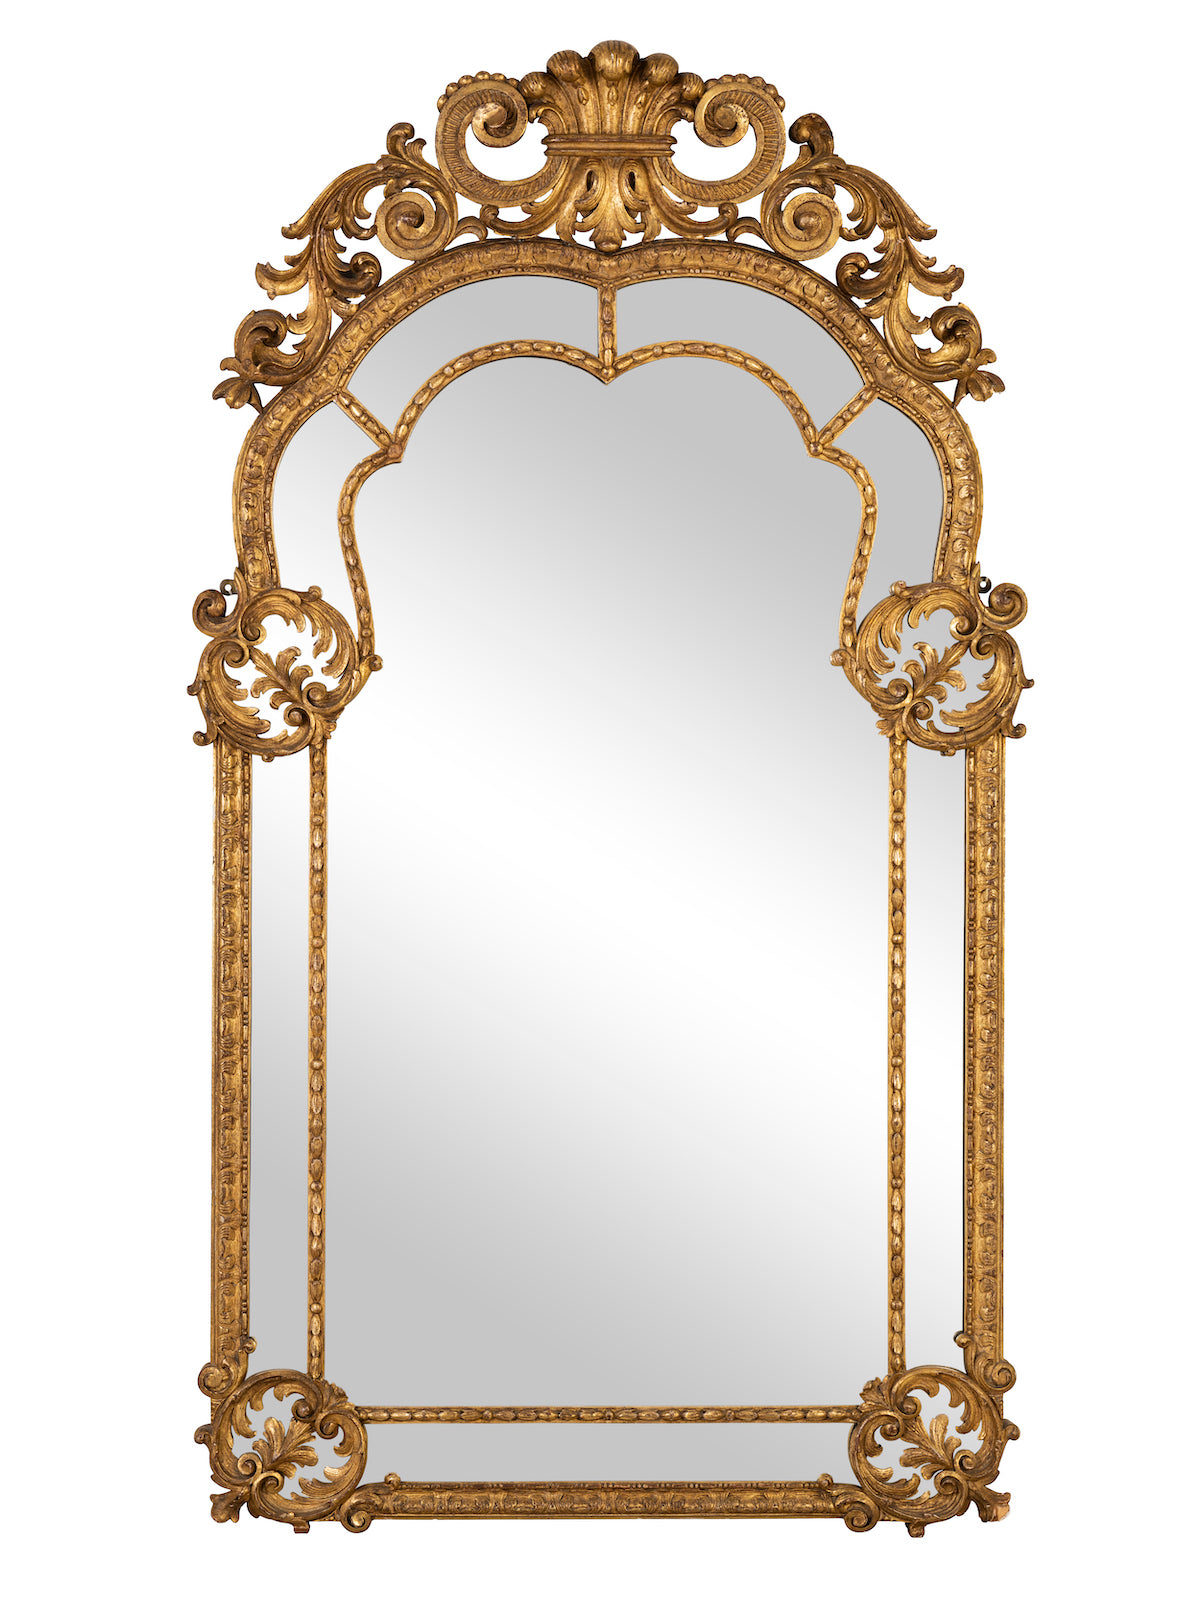 SOLD A very fine quality and unusual giltwood wall mirror, Italian 19th Century